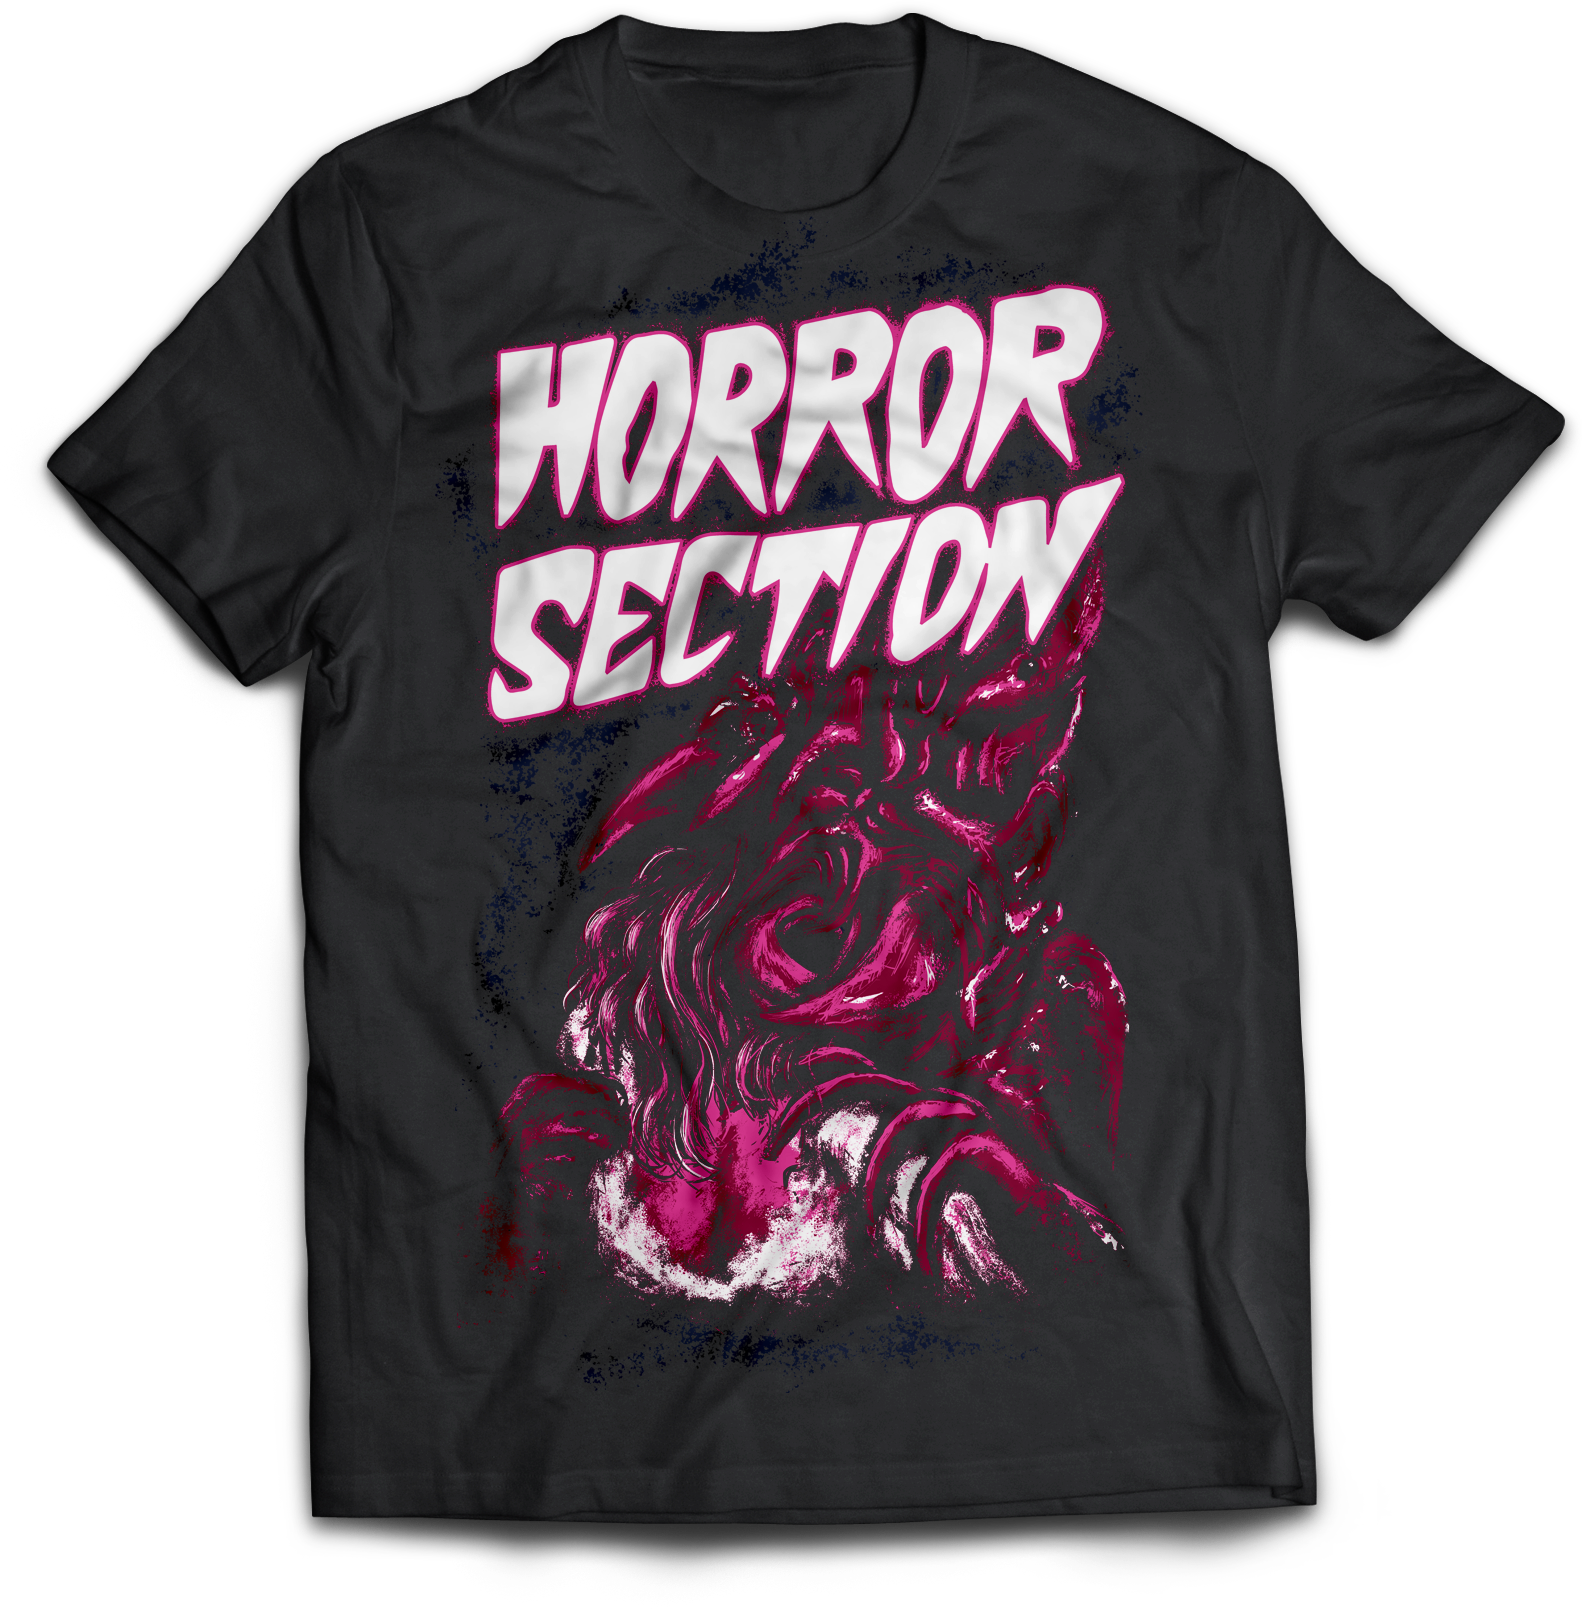 HORROR SECTION "FROM BEYOND" T-SHIRT